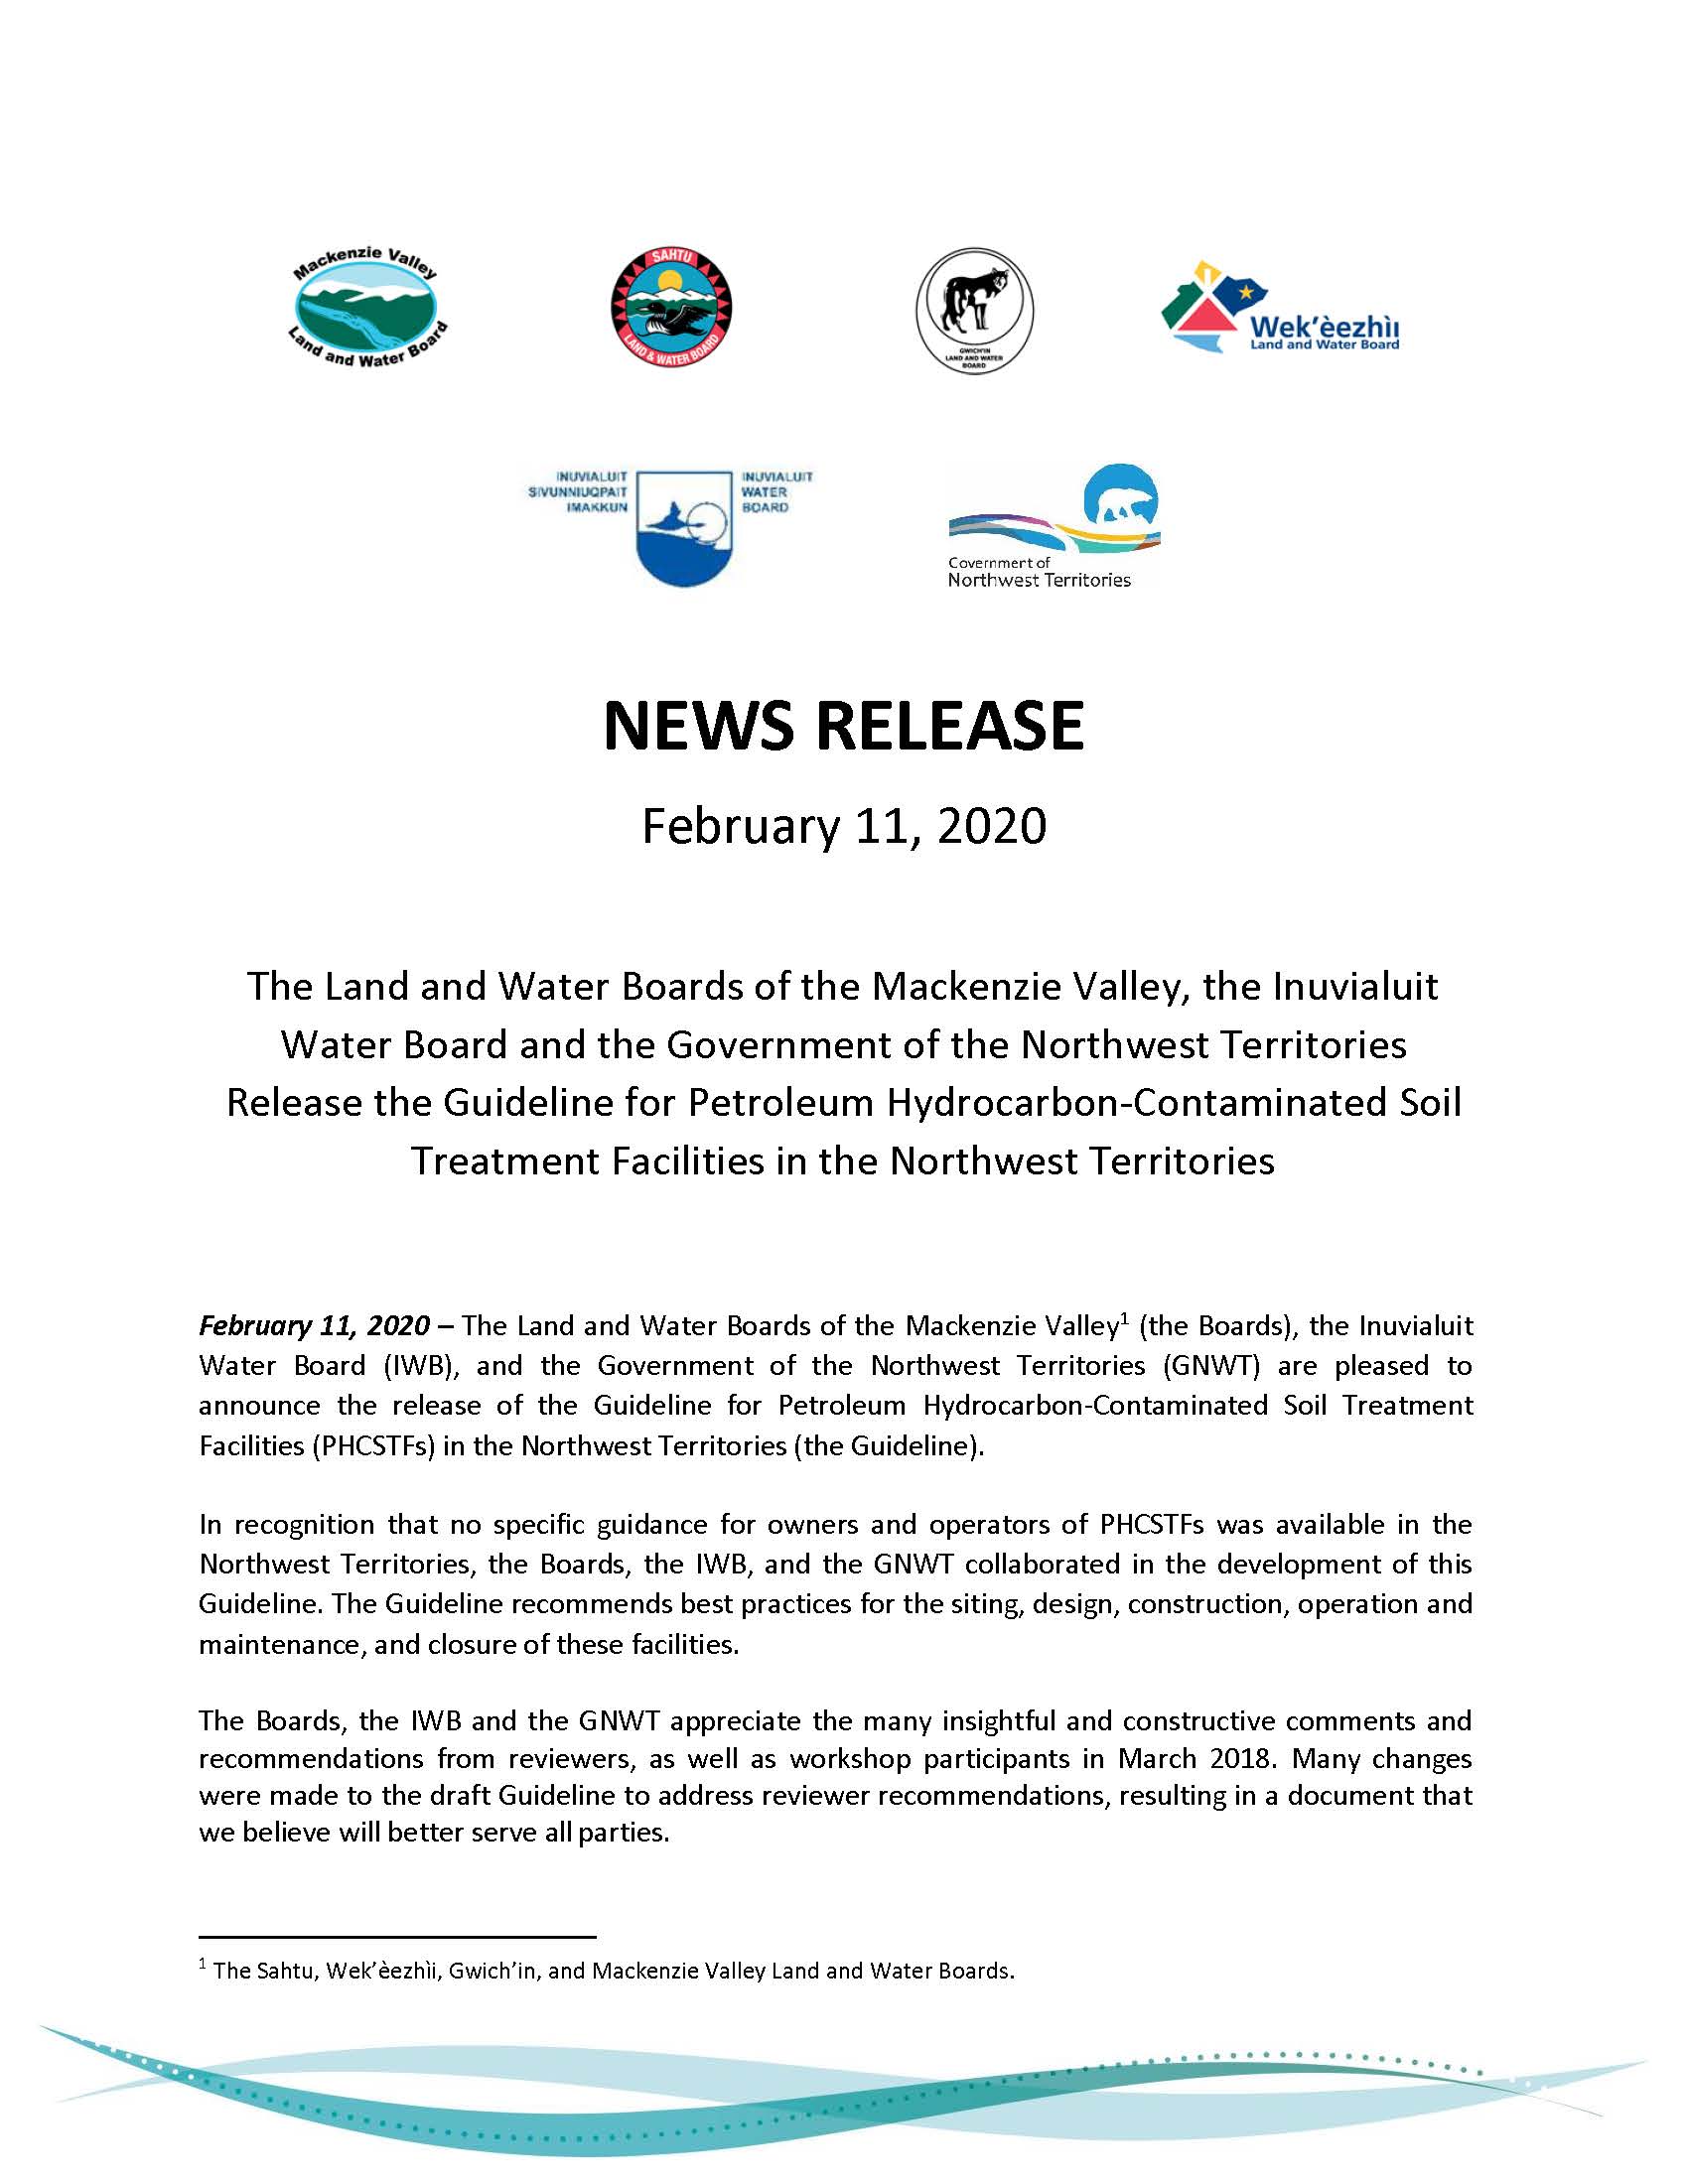 Media Release for PHCSTFS Guidelines in the NWT